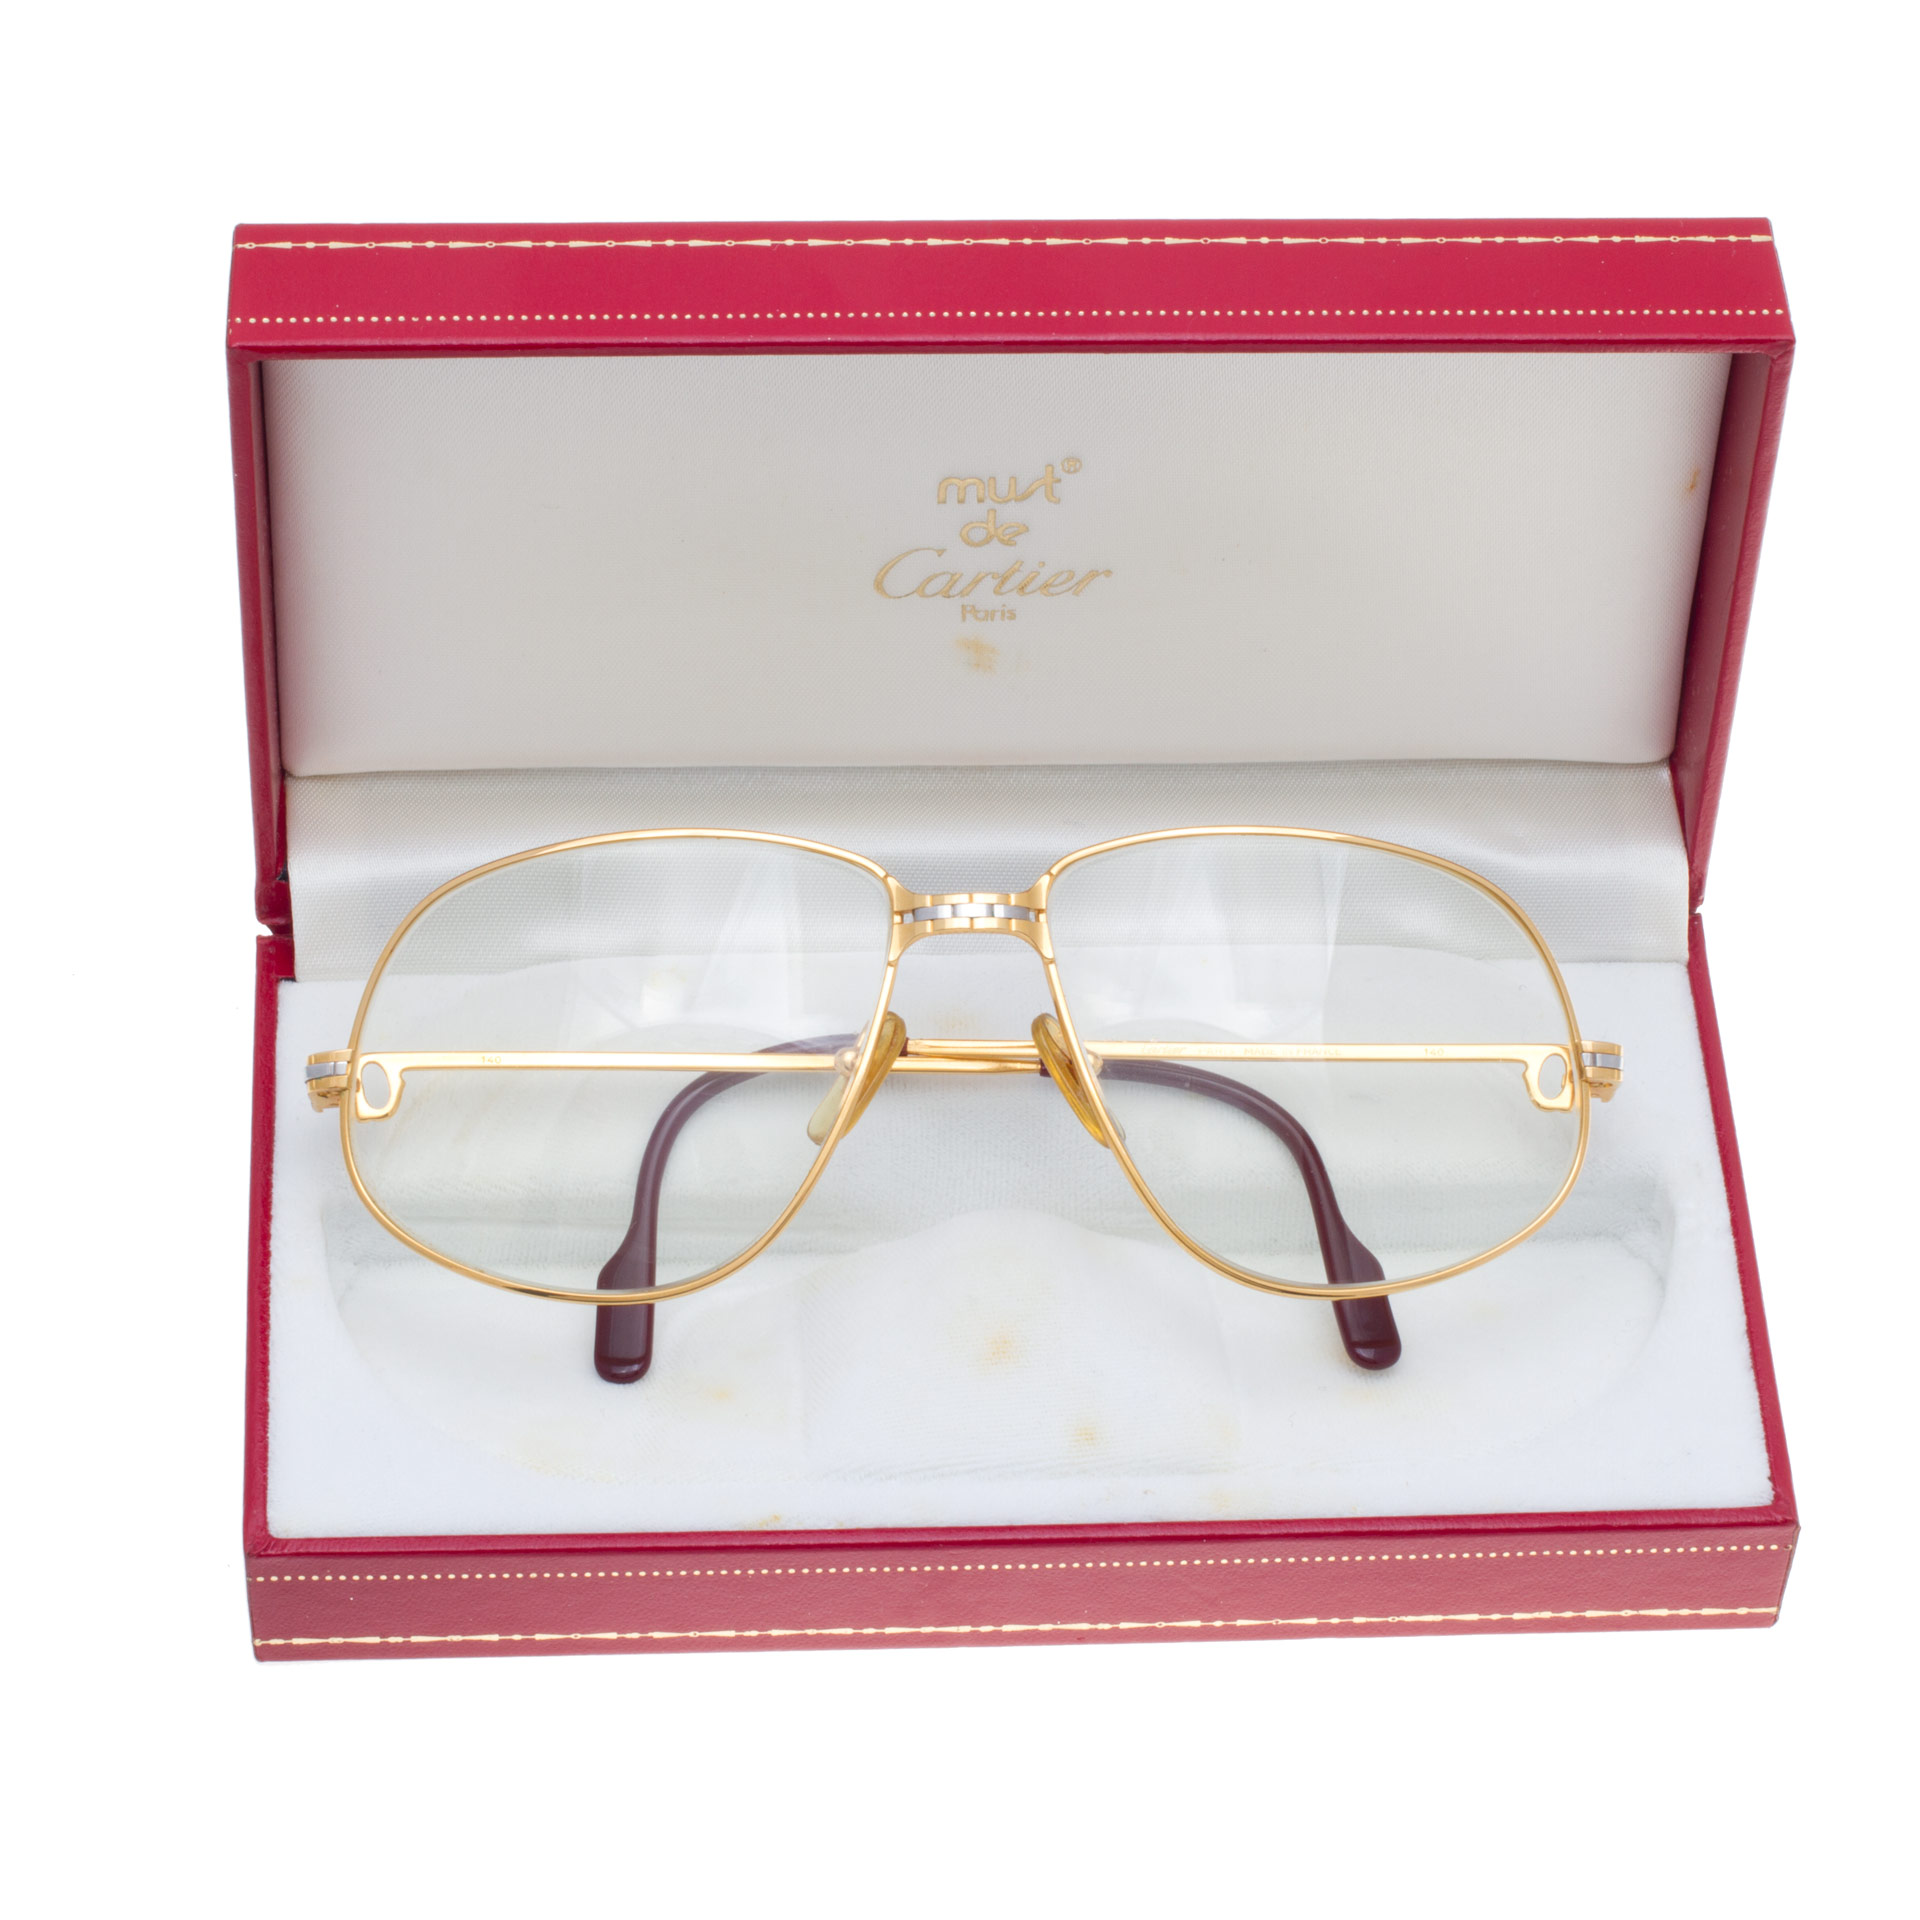 Signed "1988 Cartier" Panthere glasses in gold plated. image 2